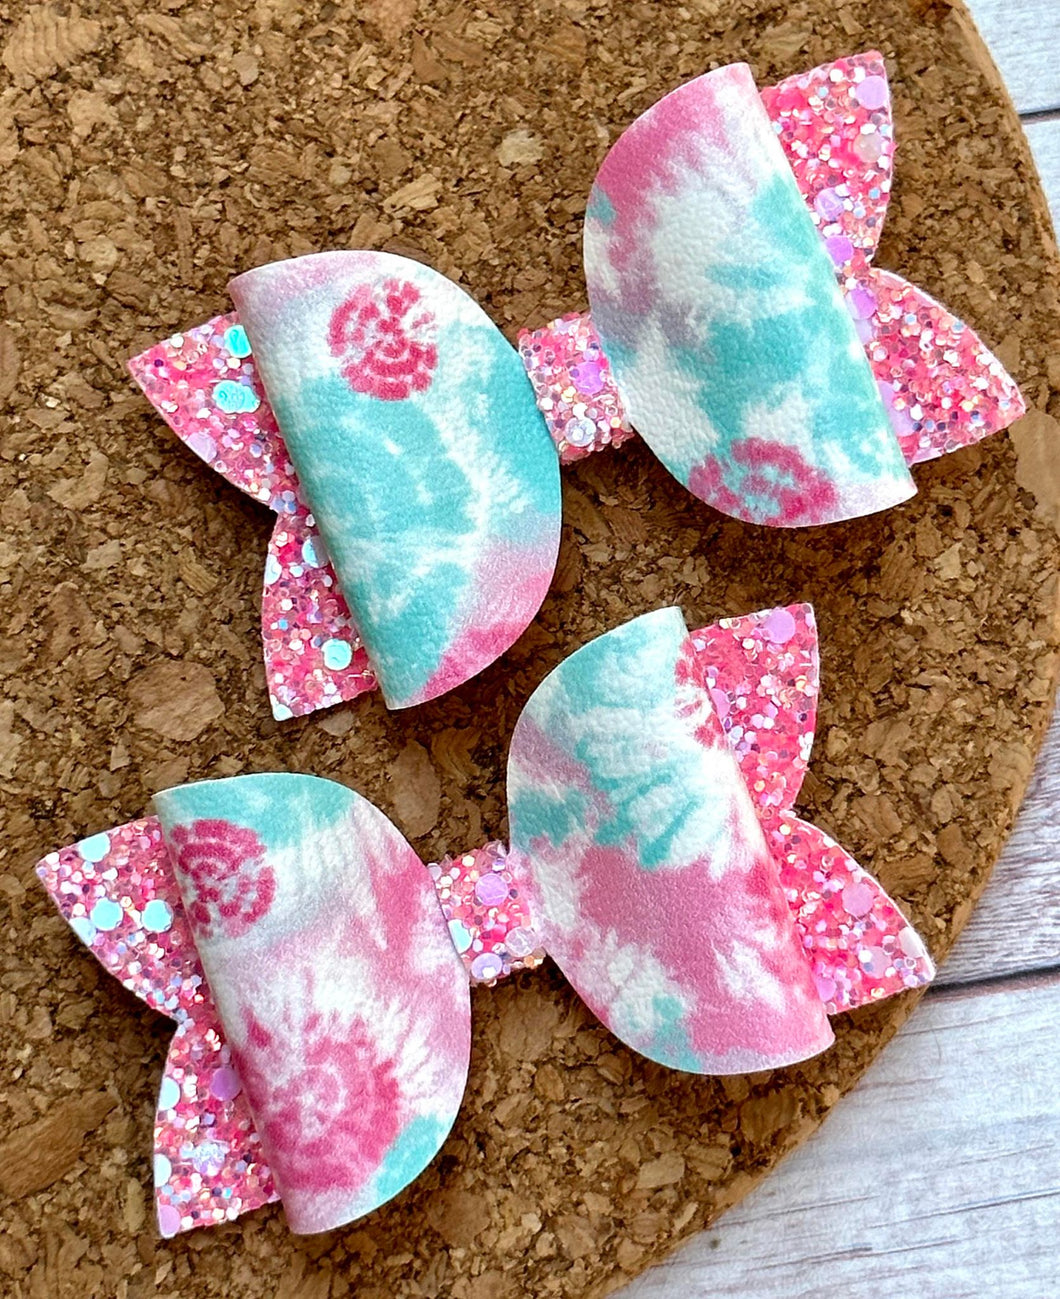 Turquoise/Pink Tie Dye Glitter Layered Leatherette Piggies Bow